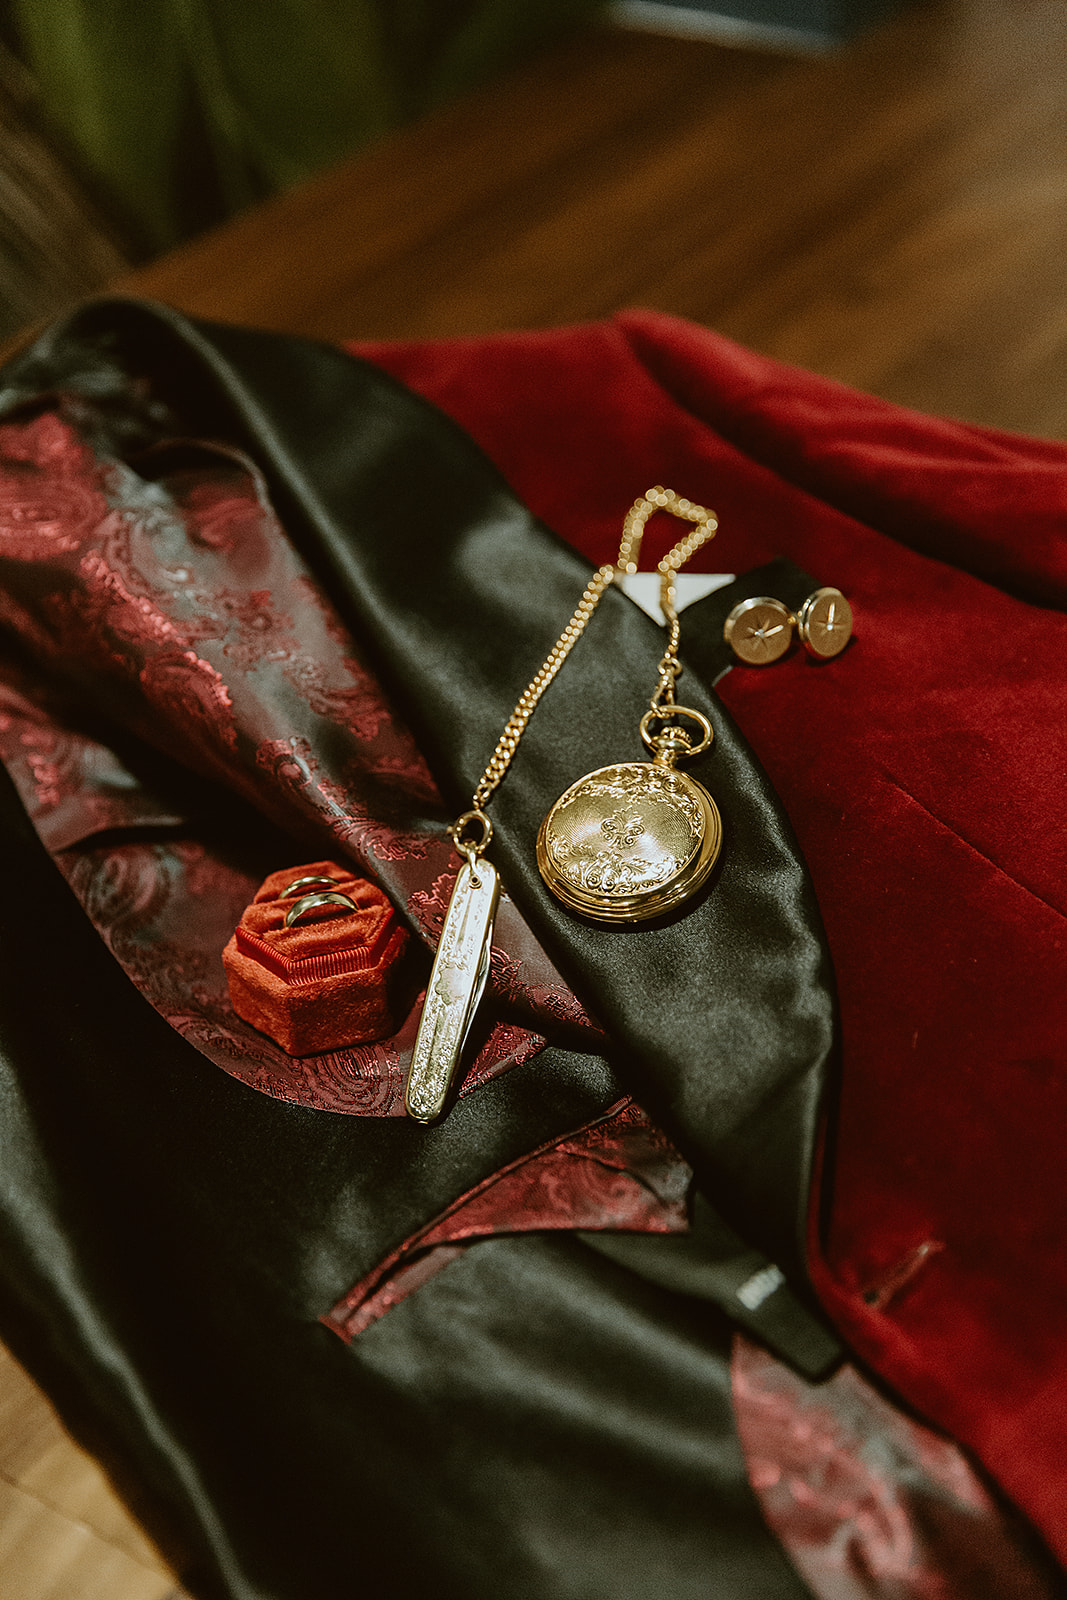 Crimson and gold groom attire details with a pocket watch